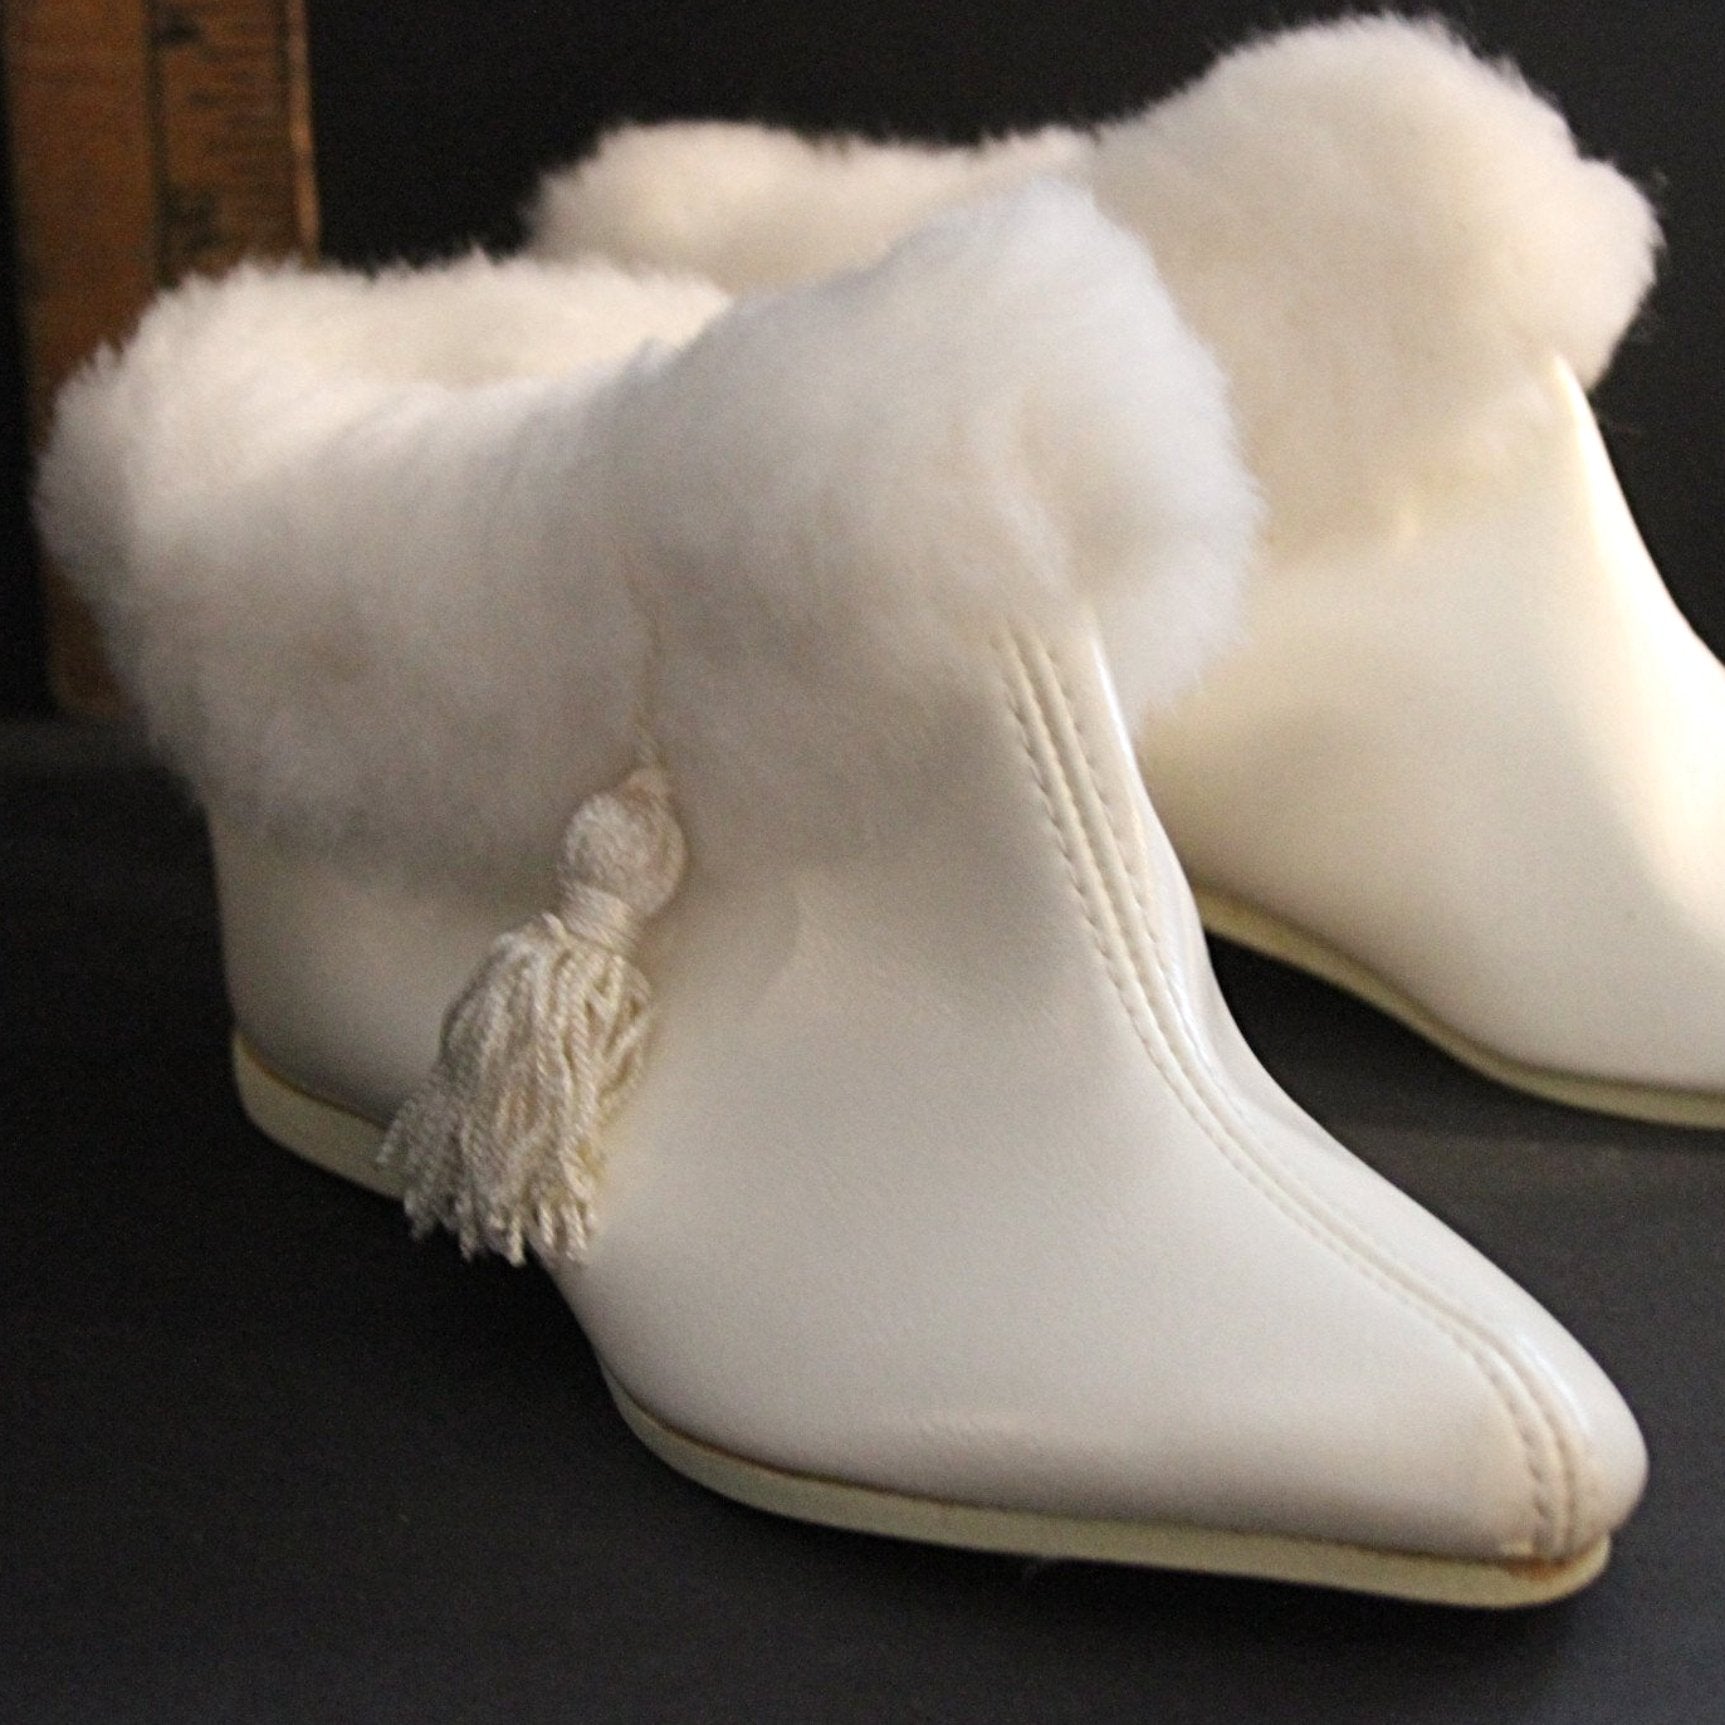 KLICKETTES White Go-Go Boots Trimmed in White Fur New Old Stock